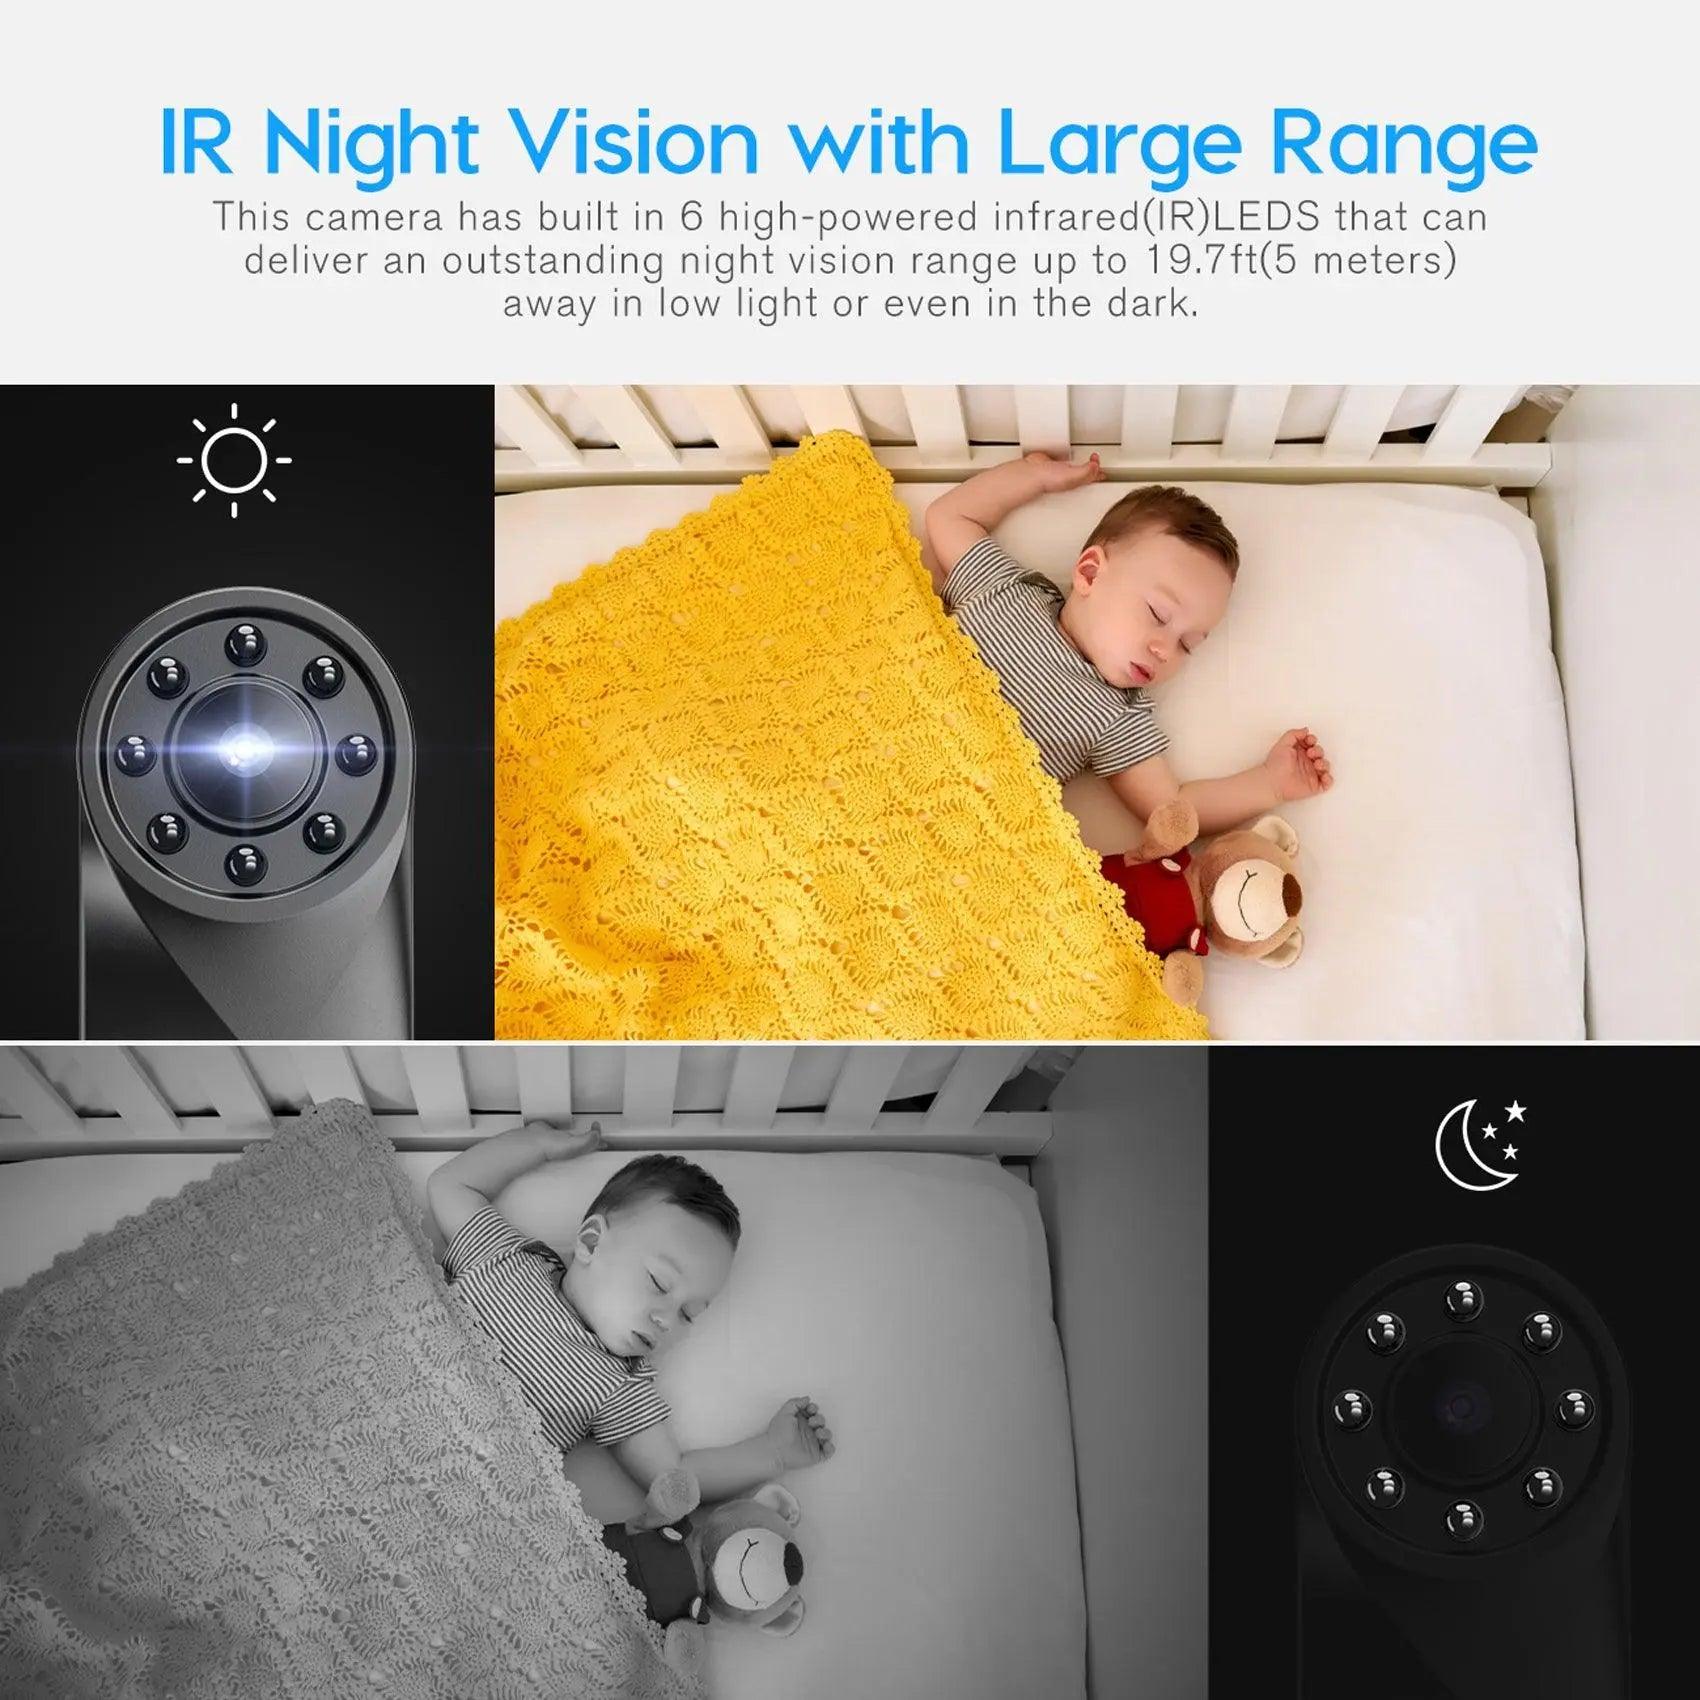 4K FHD Mini Camera - Wireless Night Vision Camera with Motion Detection and Remote Viewing - Swayfer Tech